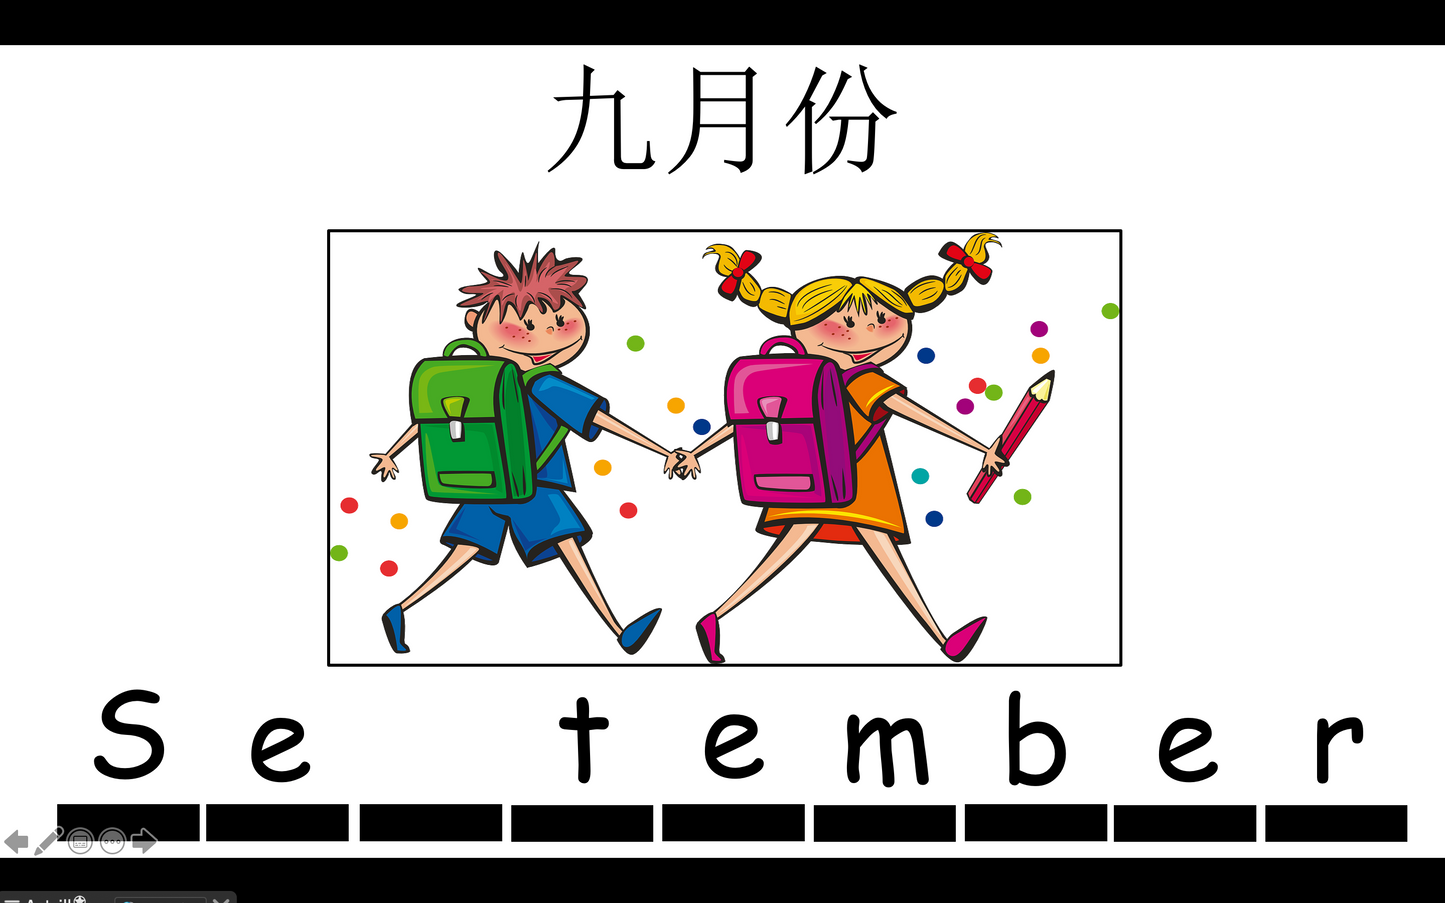 Grade 3-4 - ESL Lesson - Months of the Year / Birthday - PowerPoint Lesson